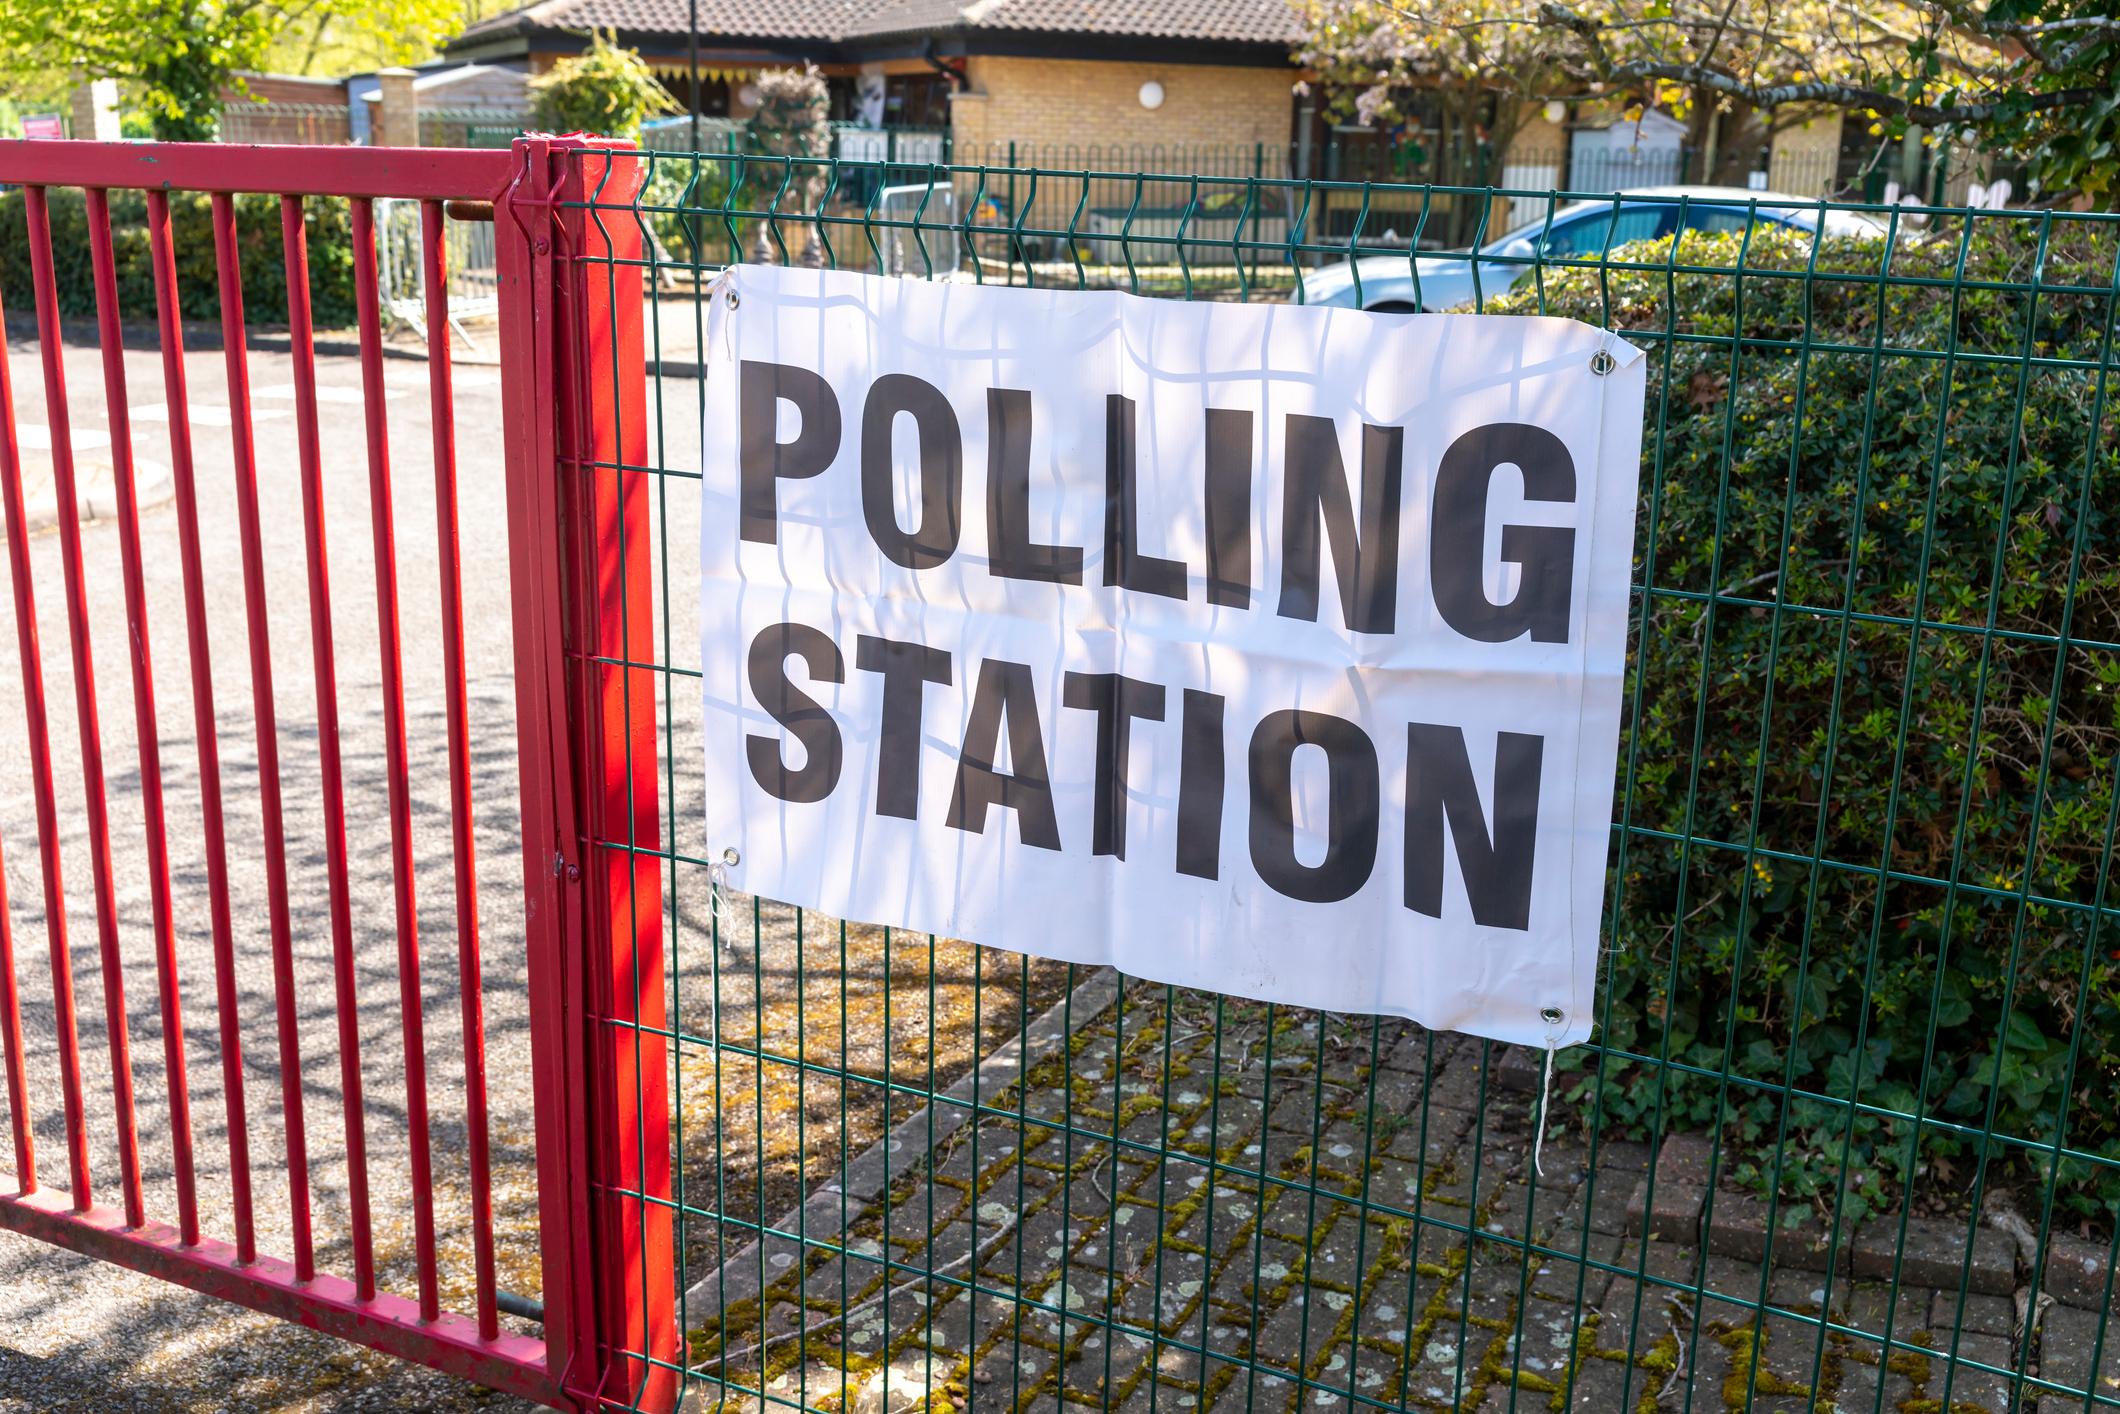 Polling Station signs outside a school.